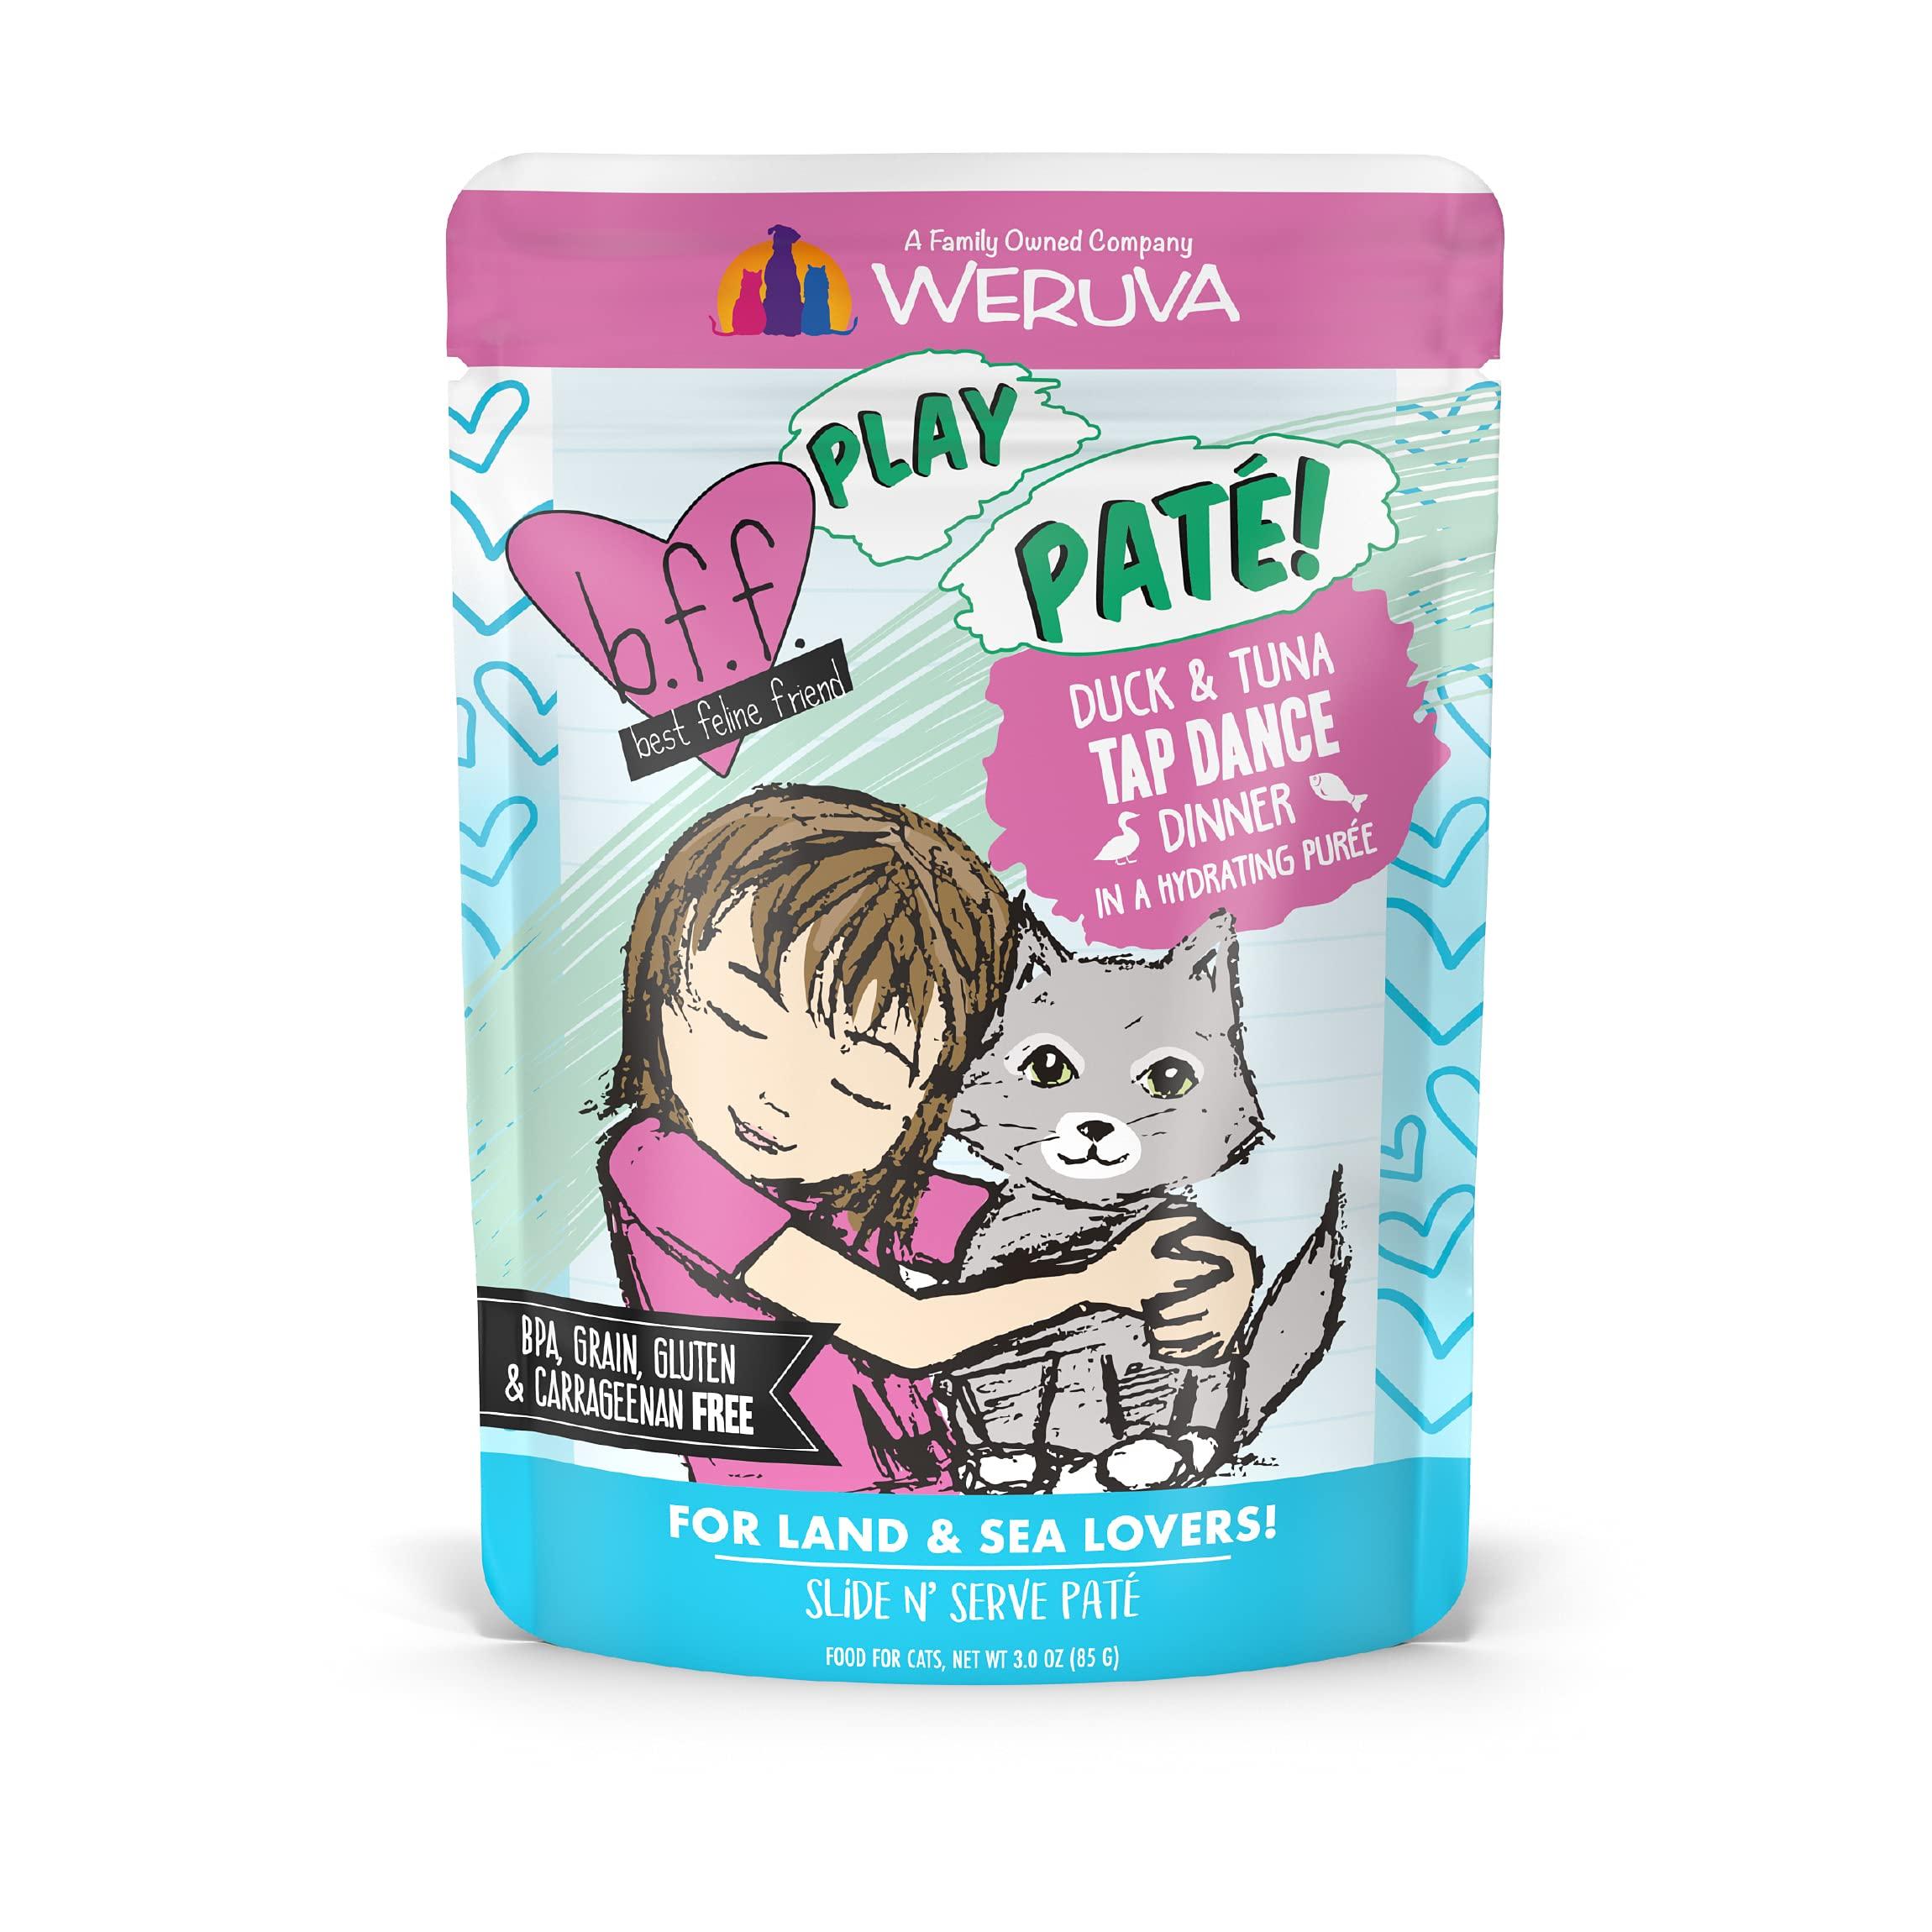 B.F.F. PLAY - Best Feline Friend PatLovers, Aw Yeah!, Duck & Tuna Tap Dance with Duck & Tuna, 3oz Pouch (Pack of 12)